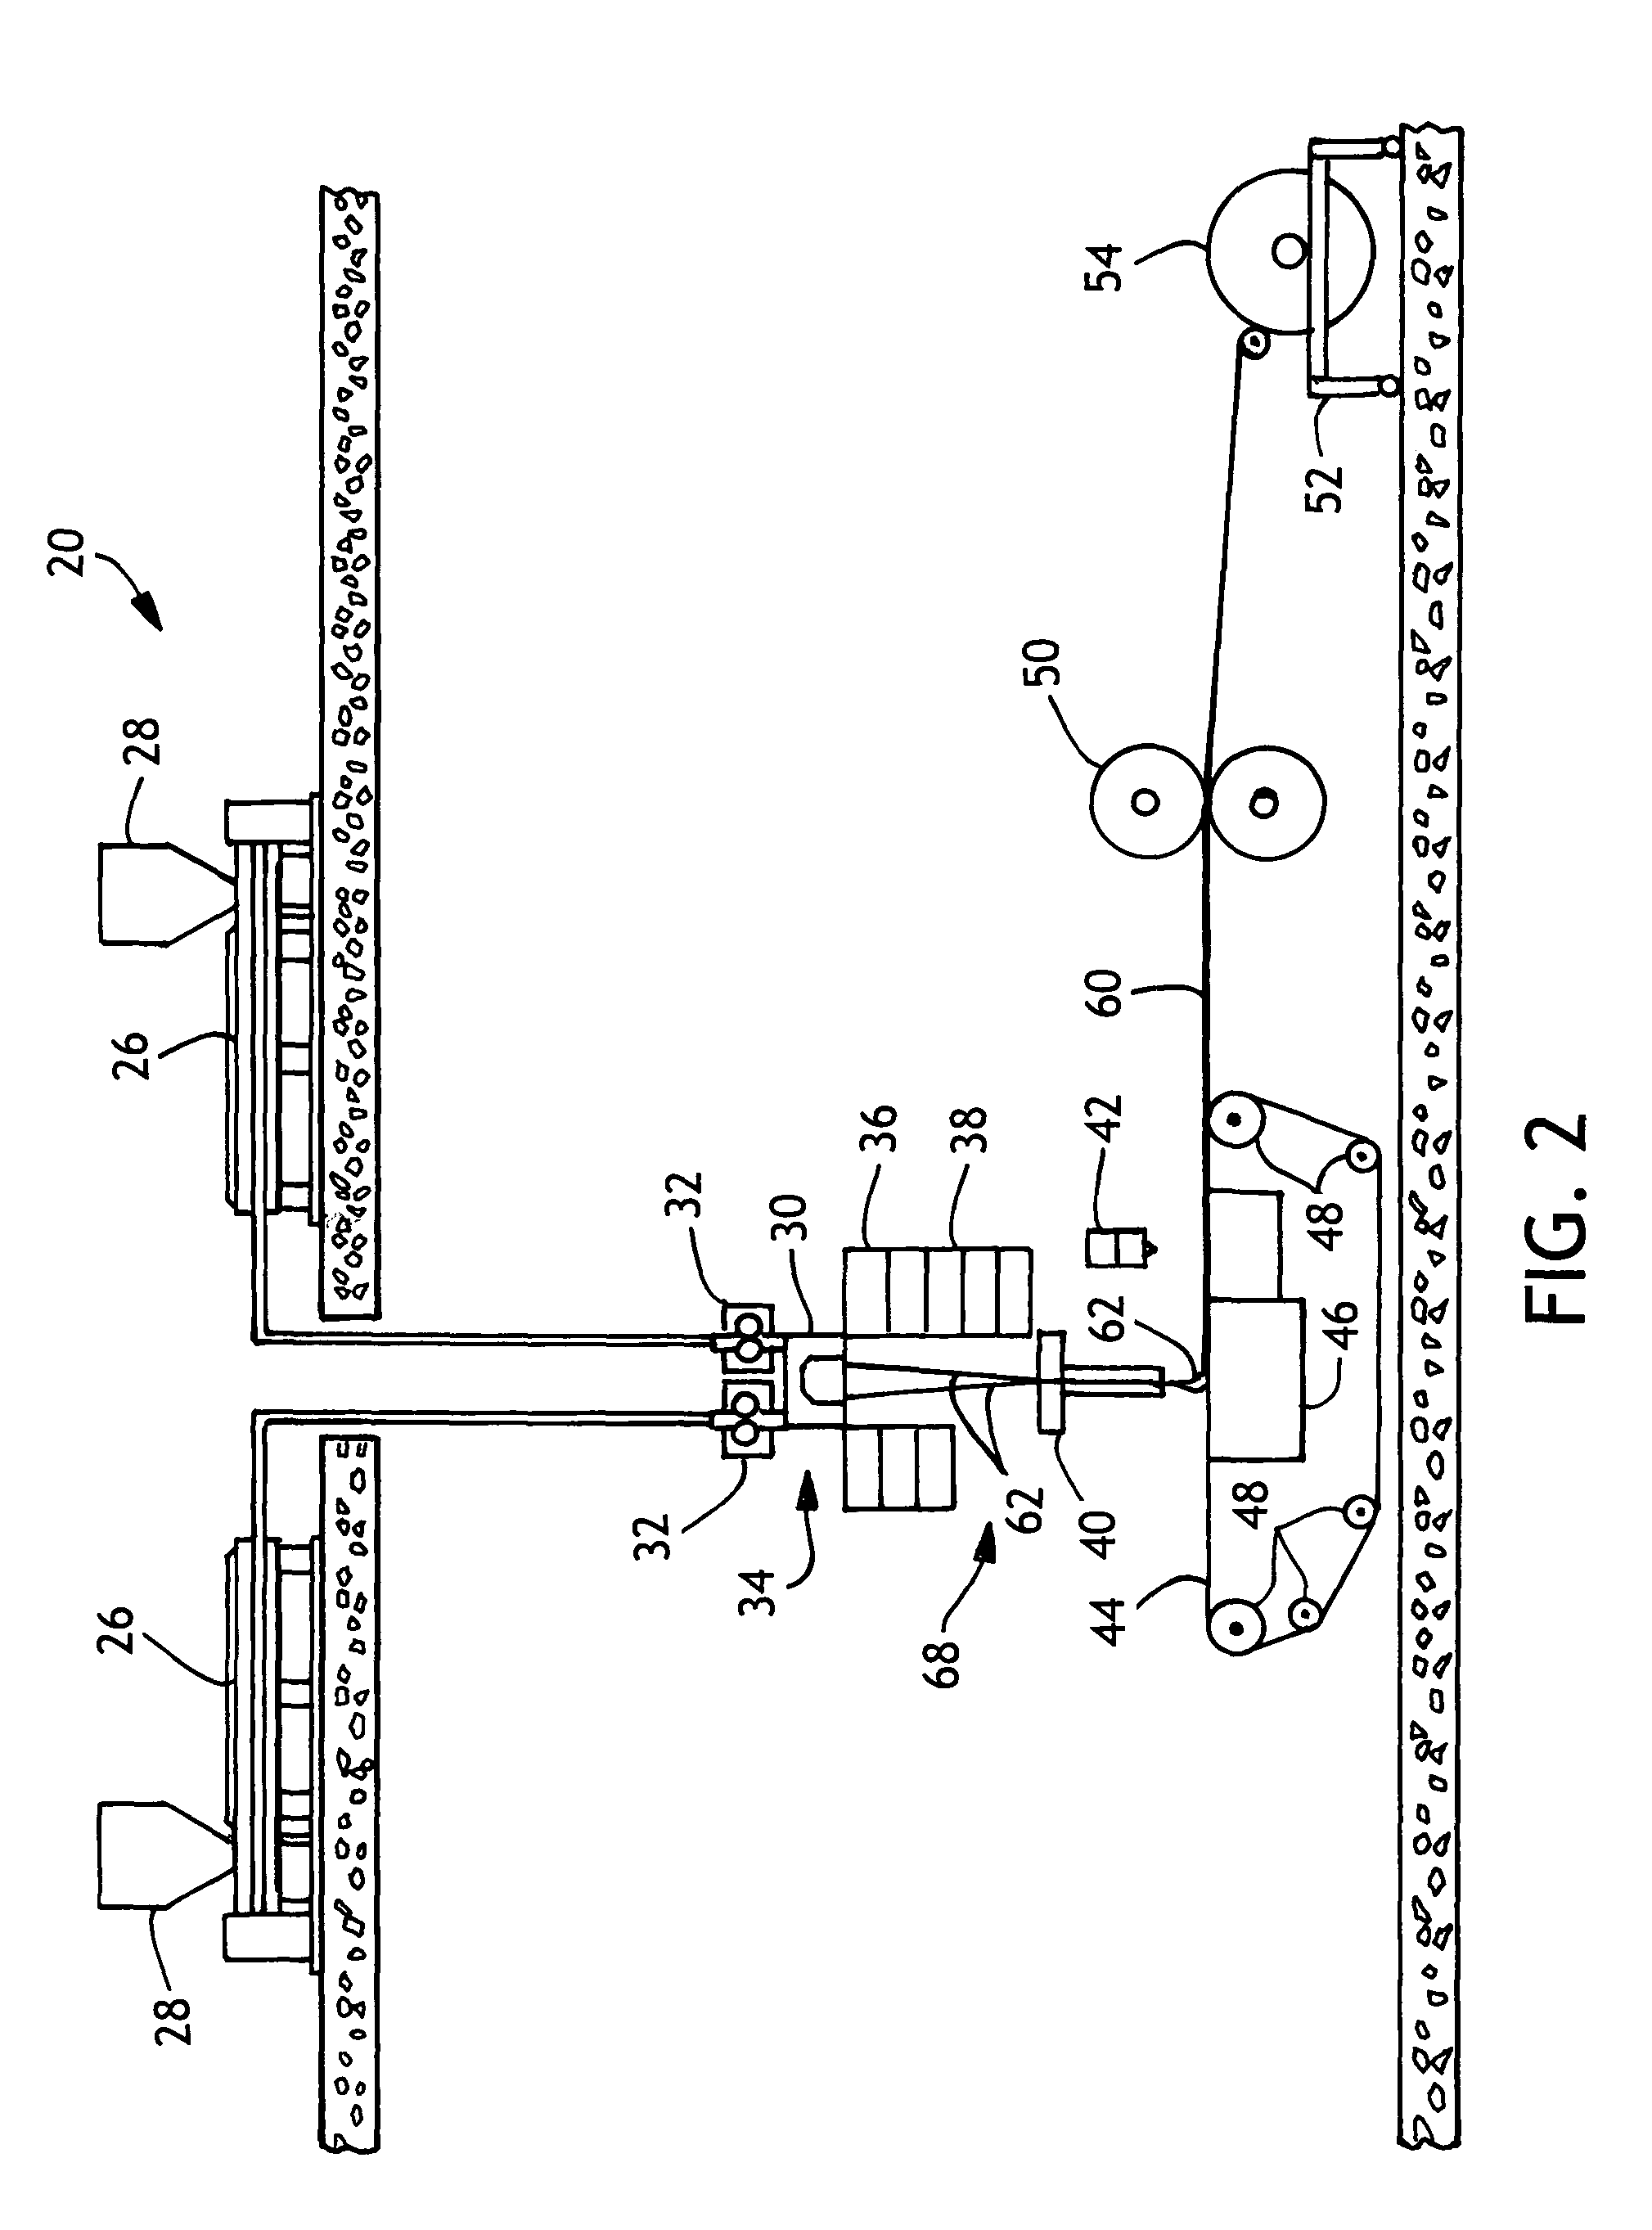 Method of making fibers and nonwovens with improved properties